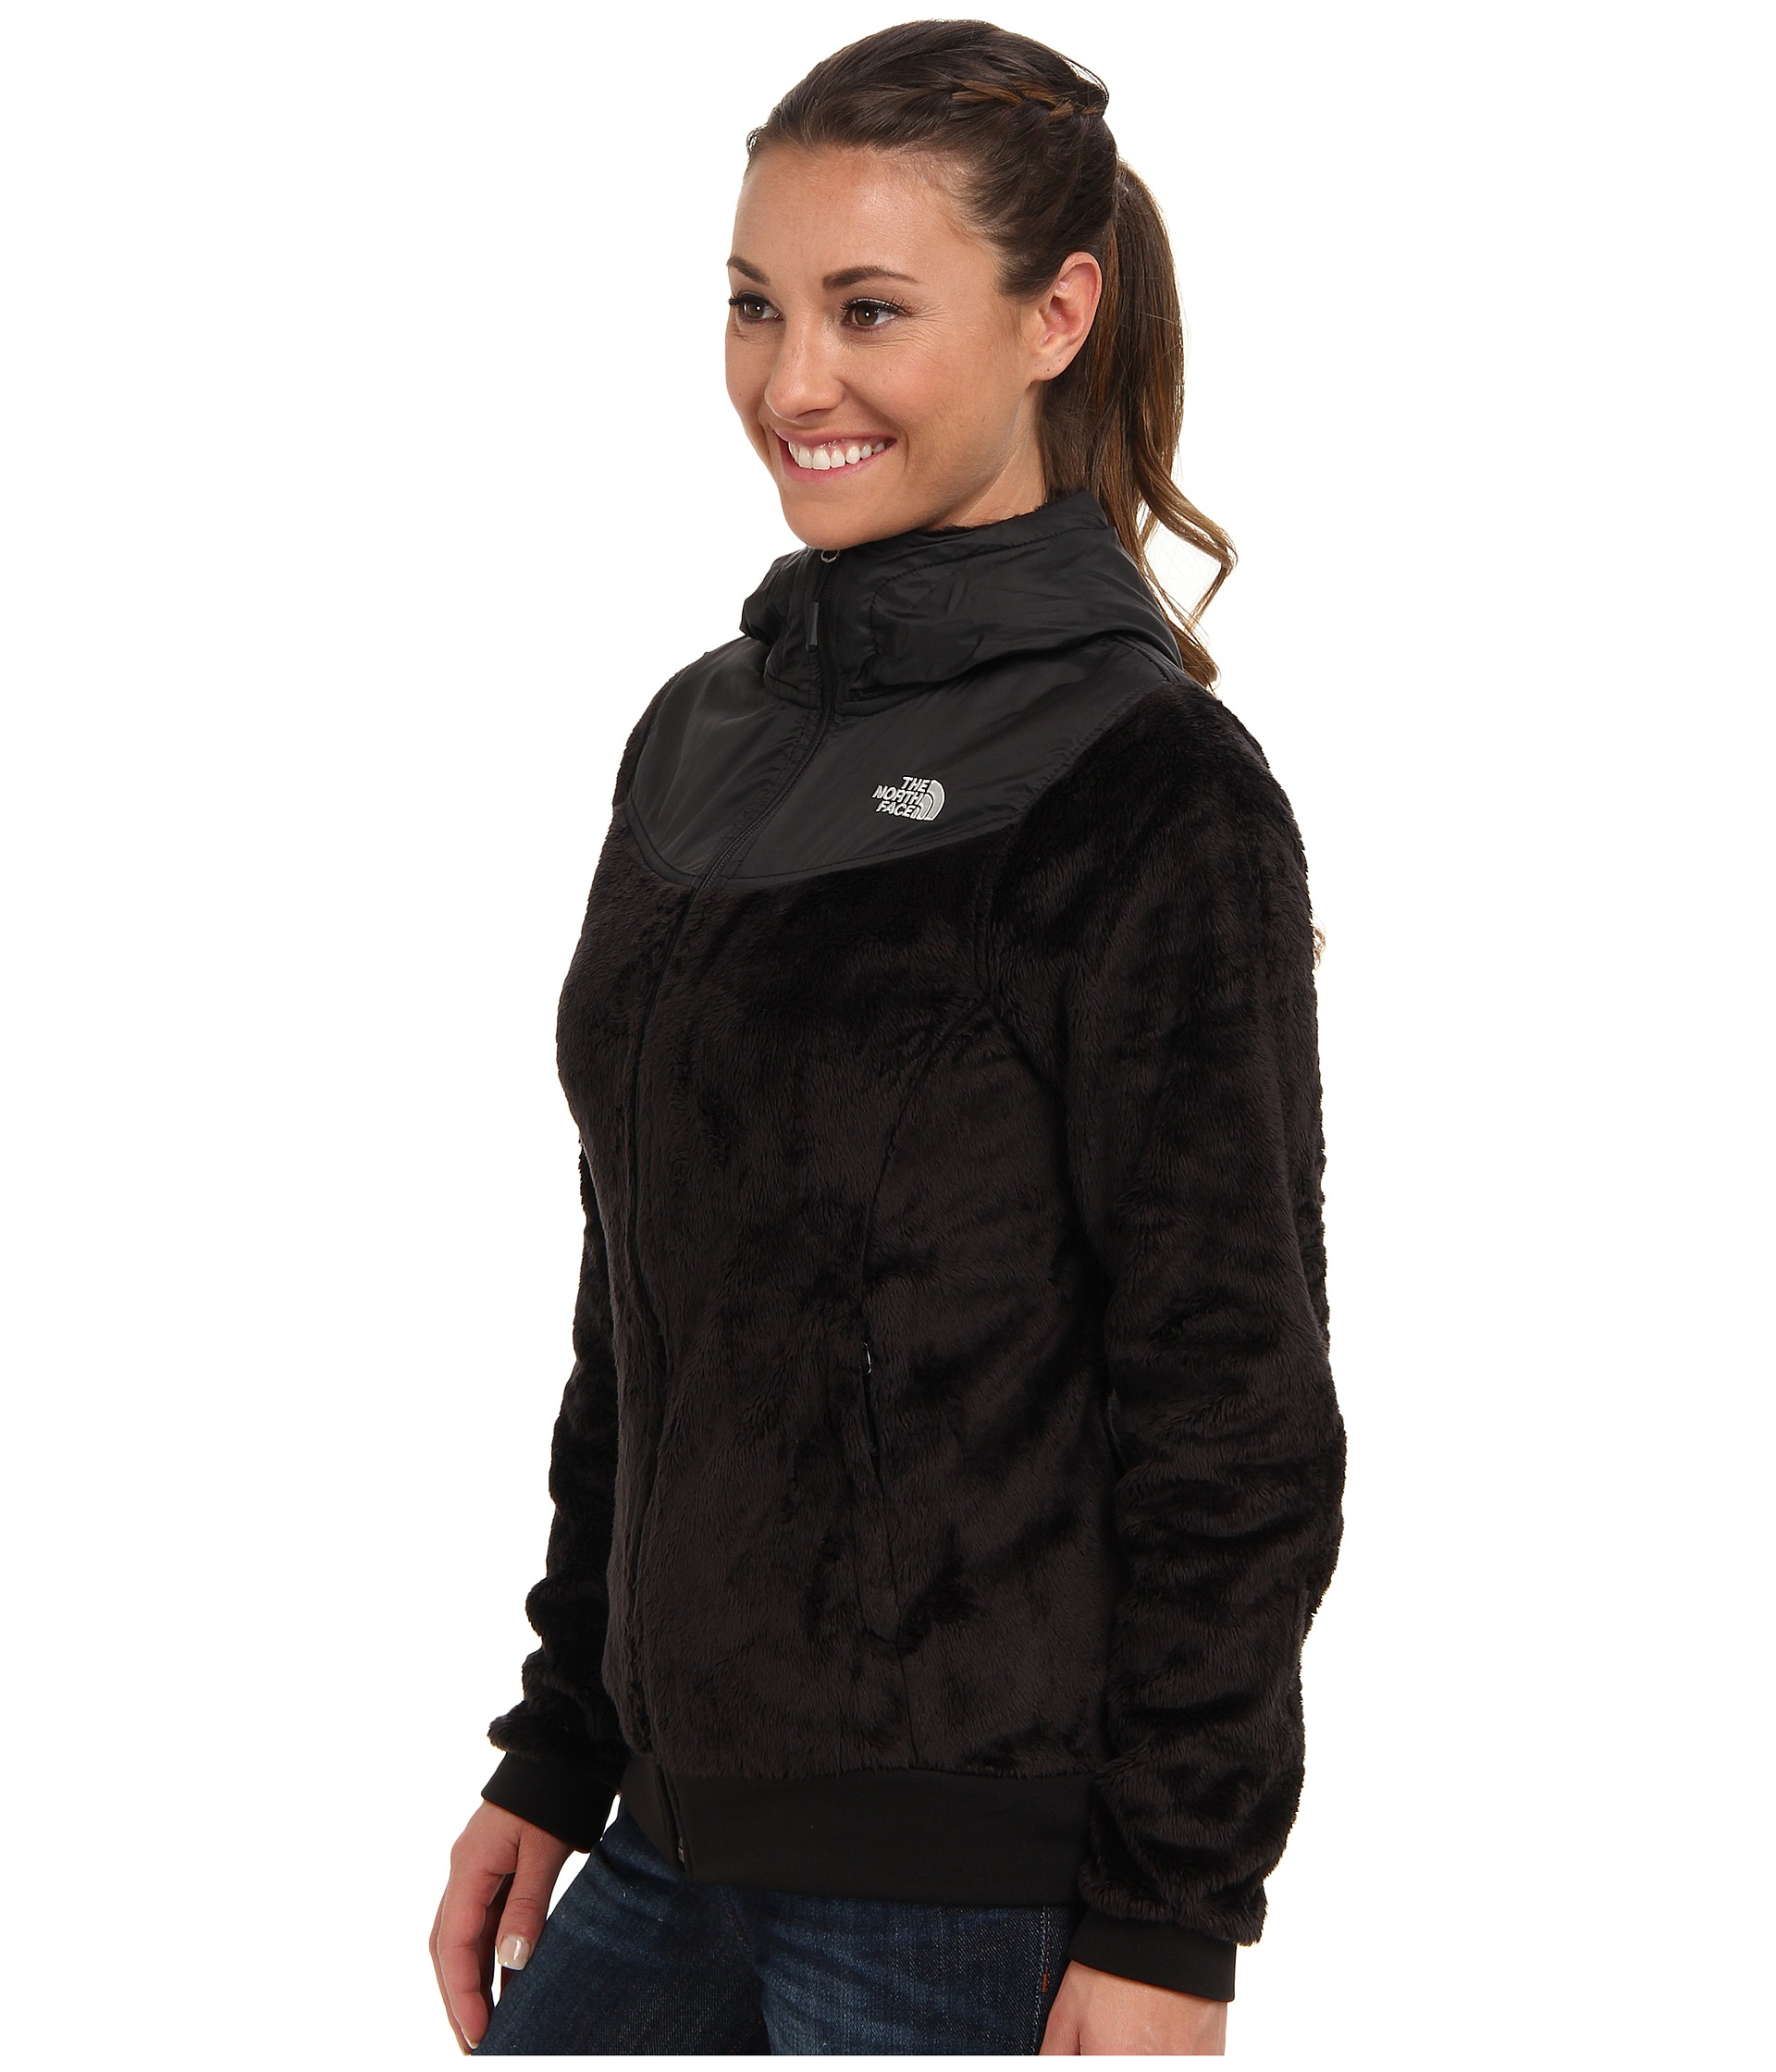 north face oso hoodie women's